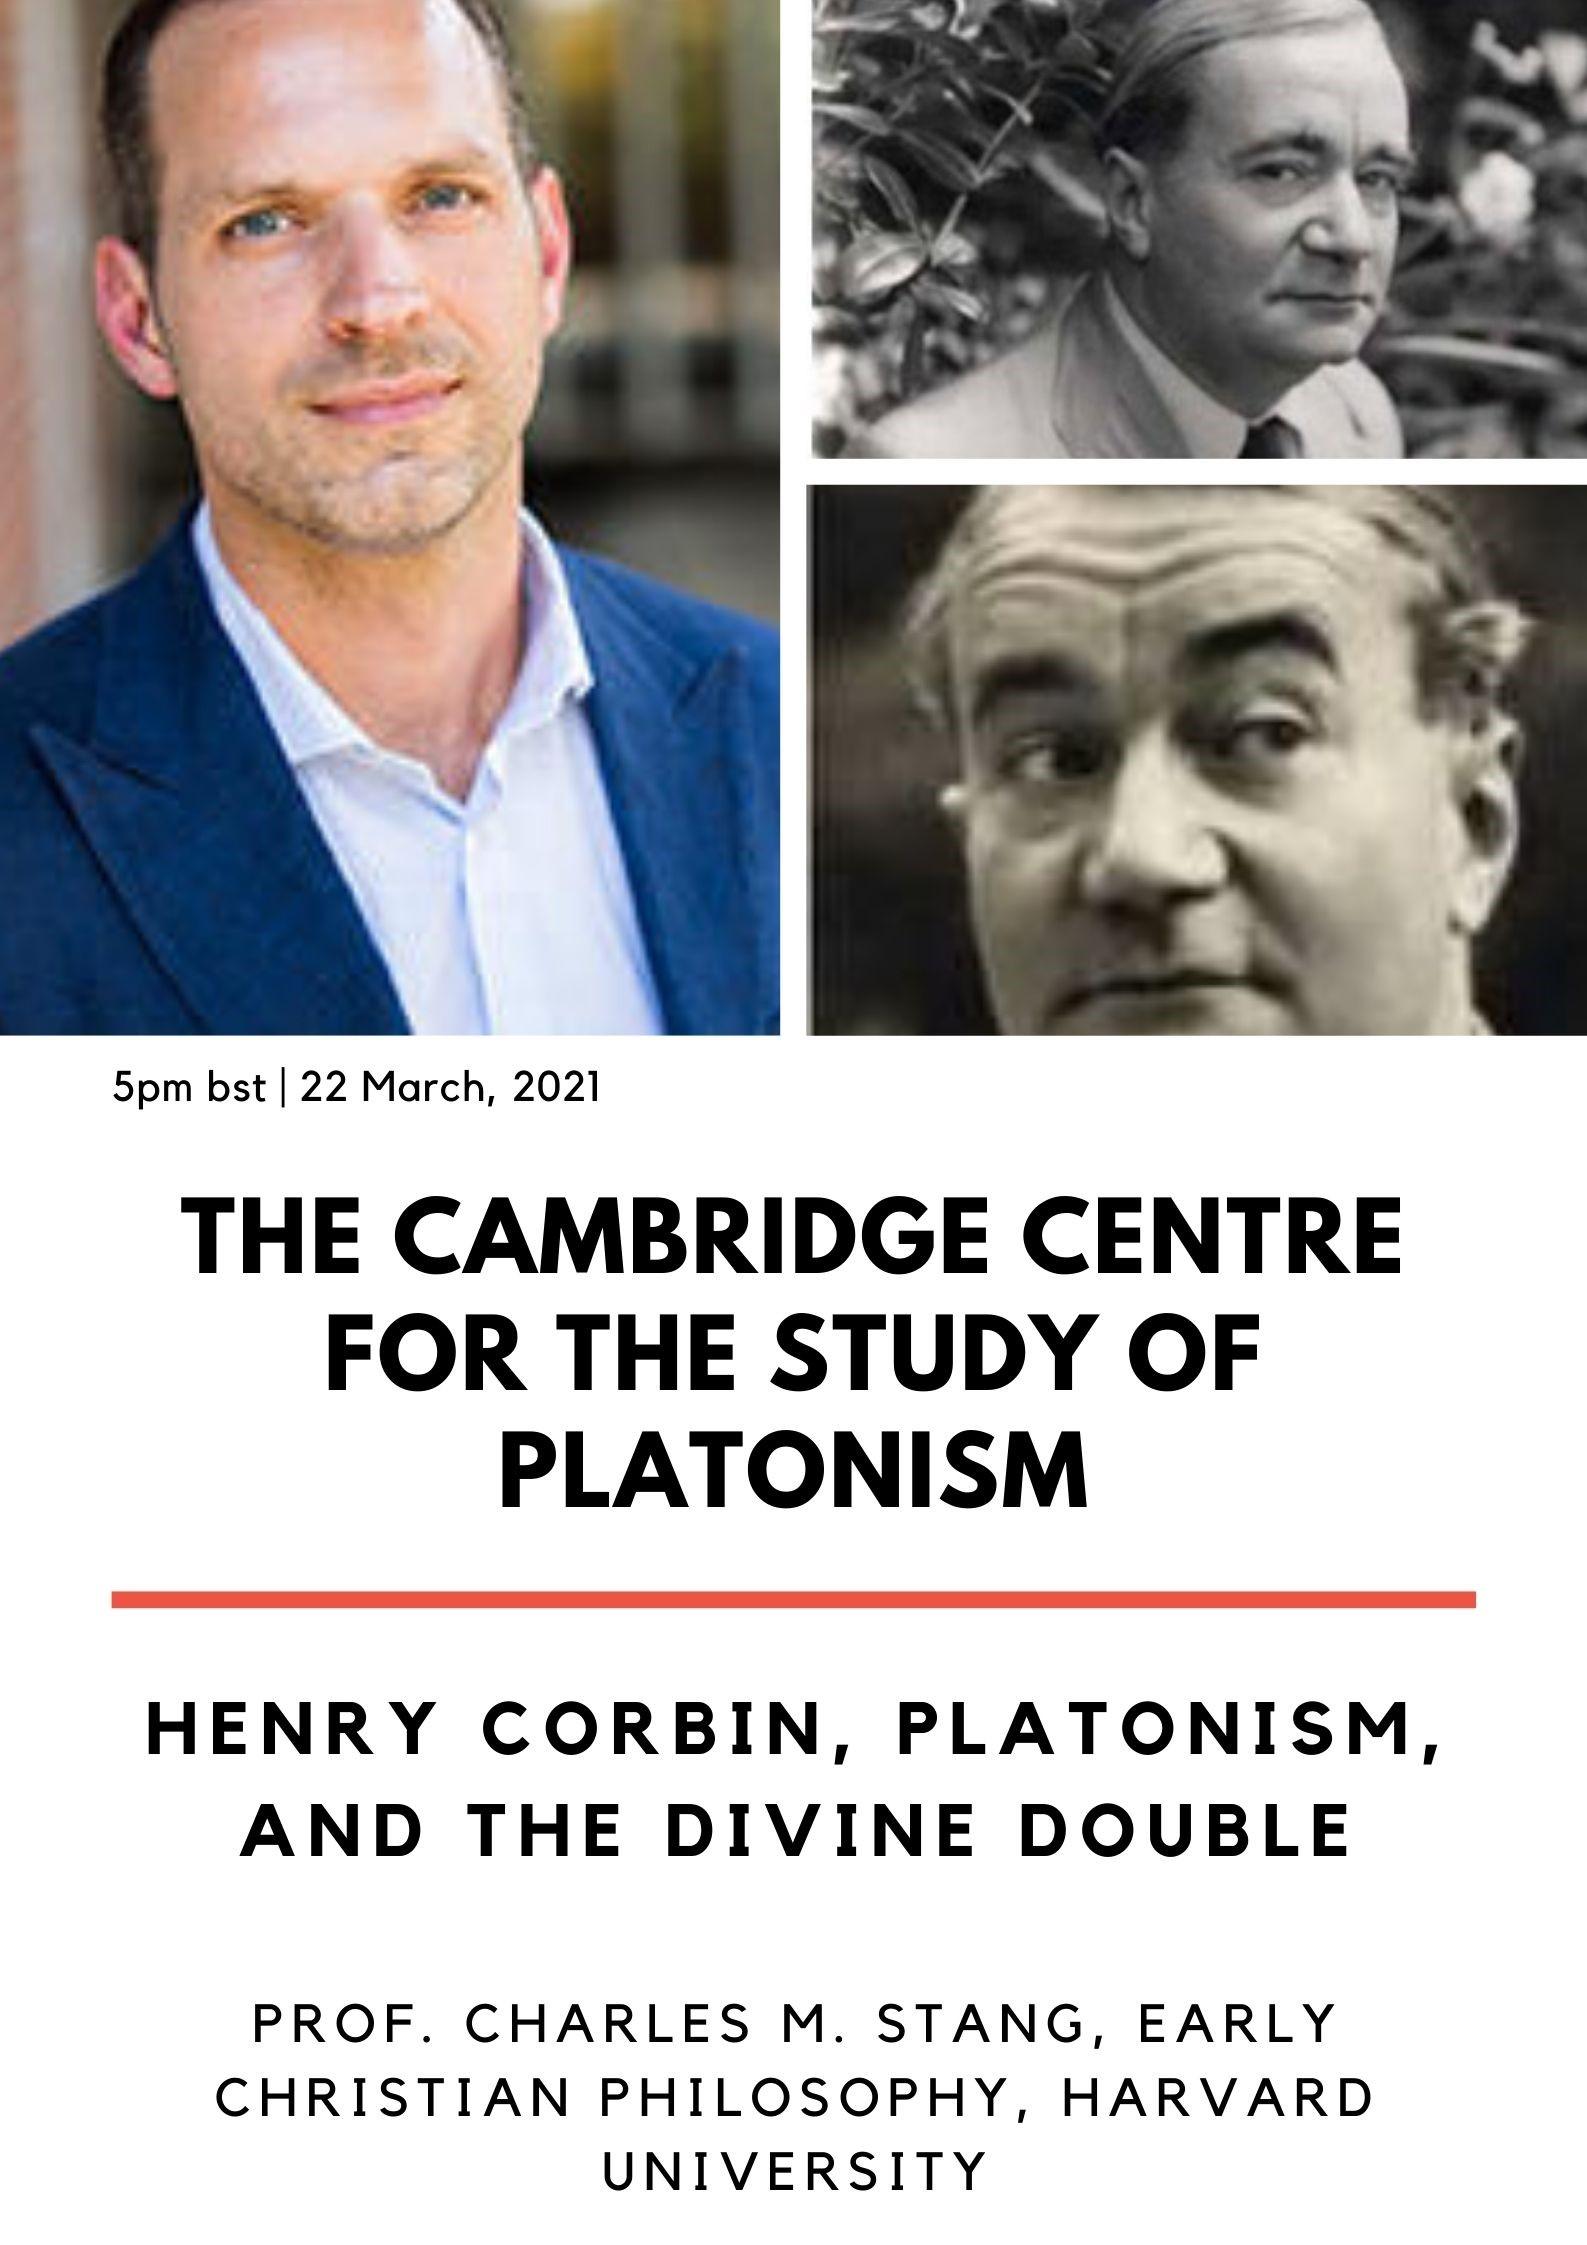 Prof. Charles M. Stang - "Henry Corbin, Platonism, and the Divine Double"